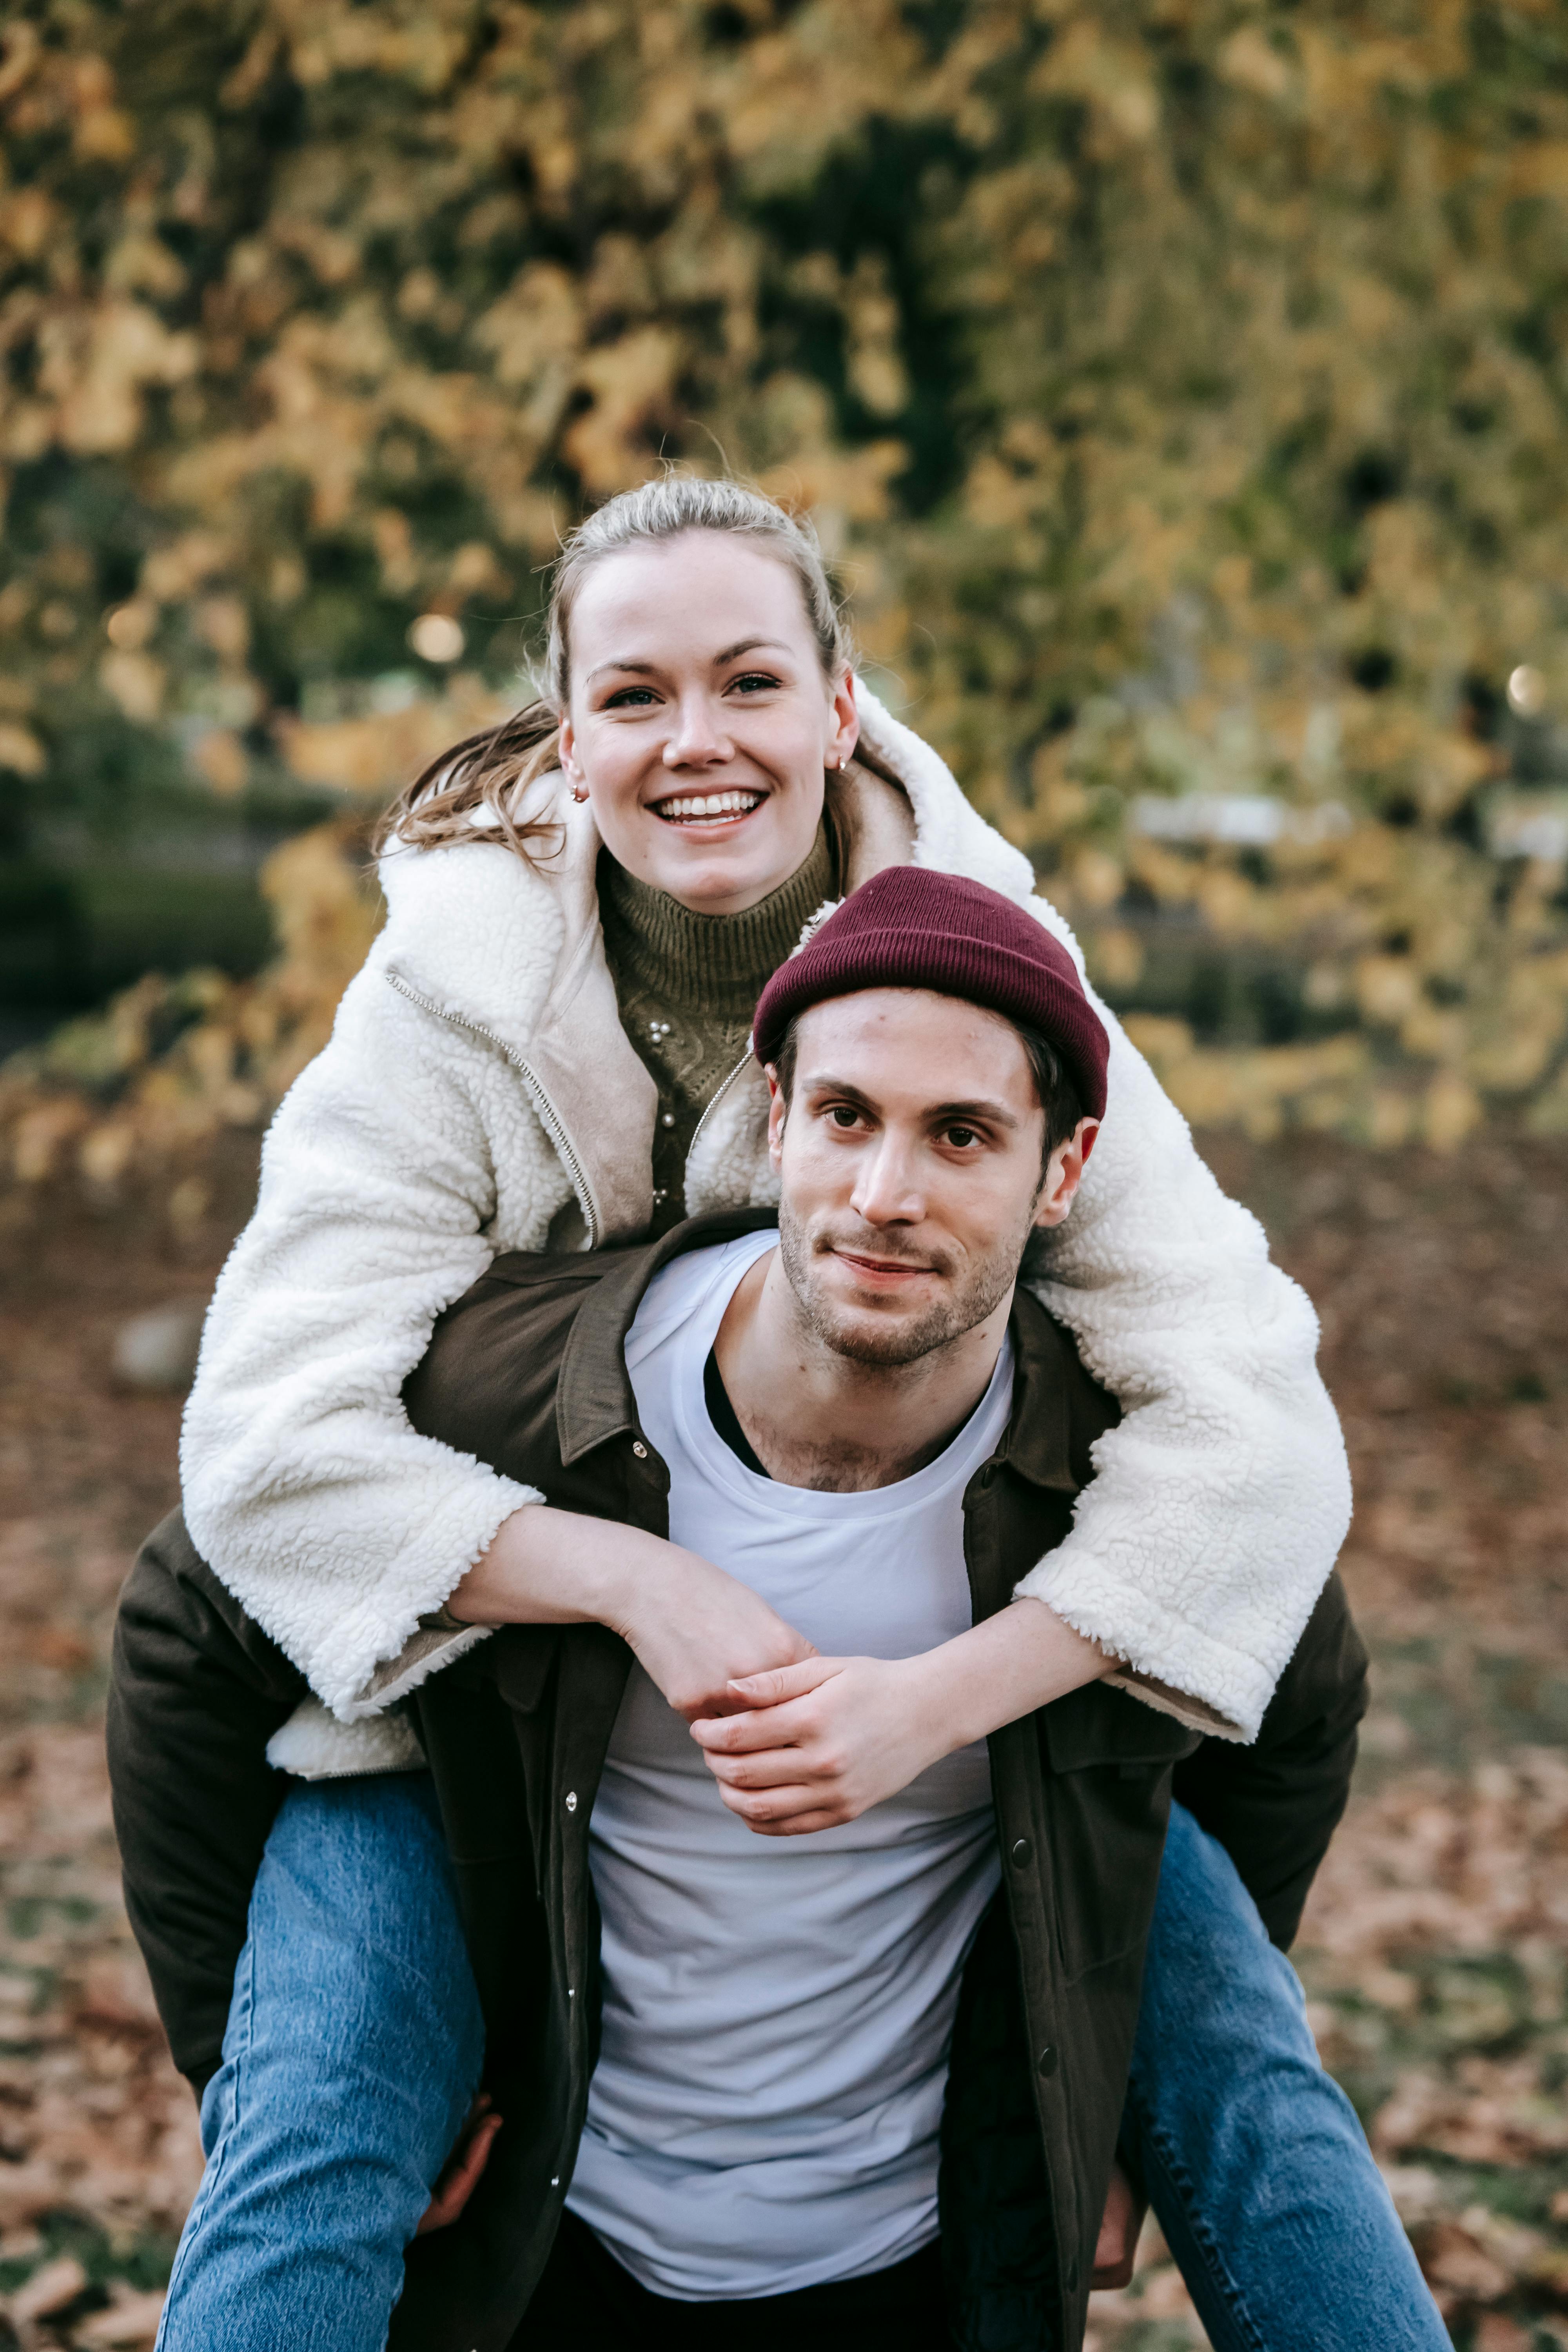 Couple in love girlfriend riding on back of boyfriend at park,Romantic and  enjoying in moment of happiness time,Happy and smiling Photos | Adobe Stock